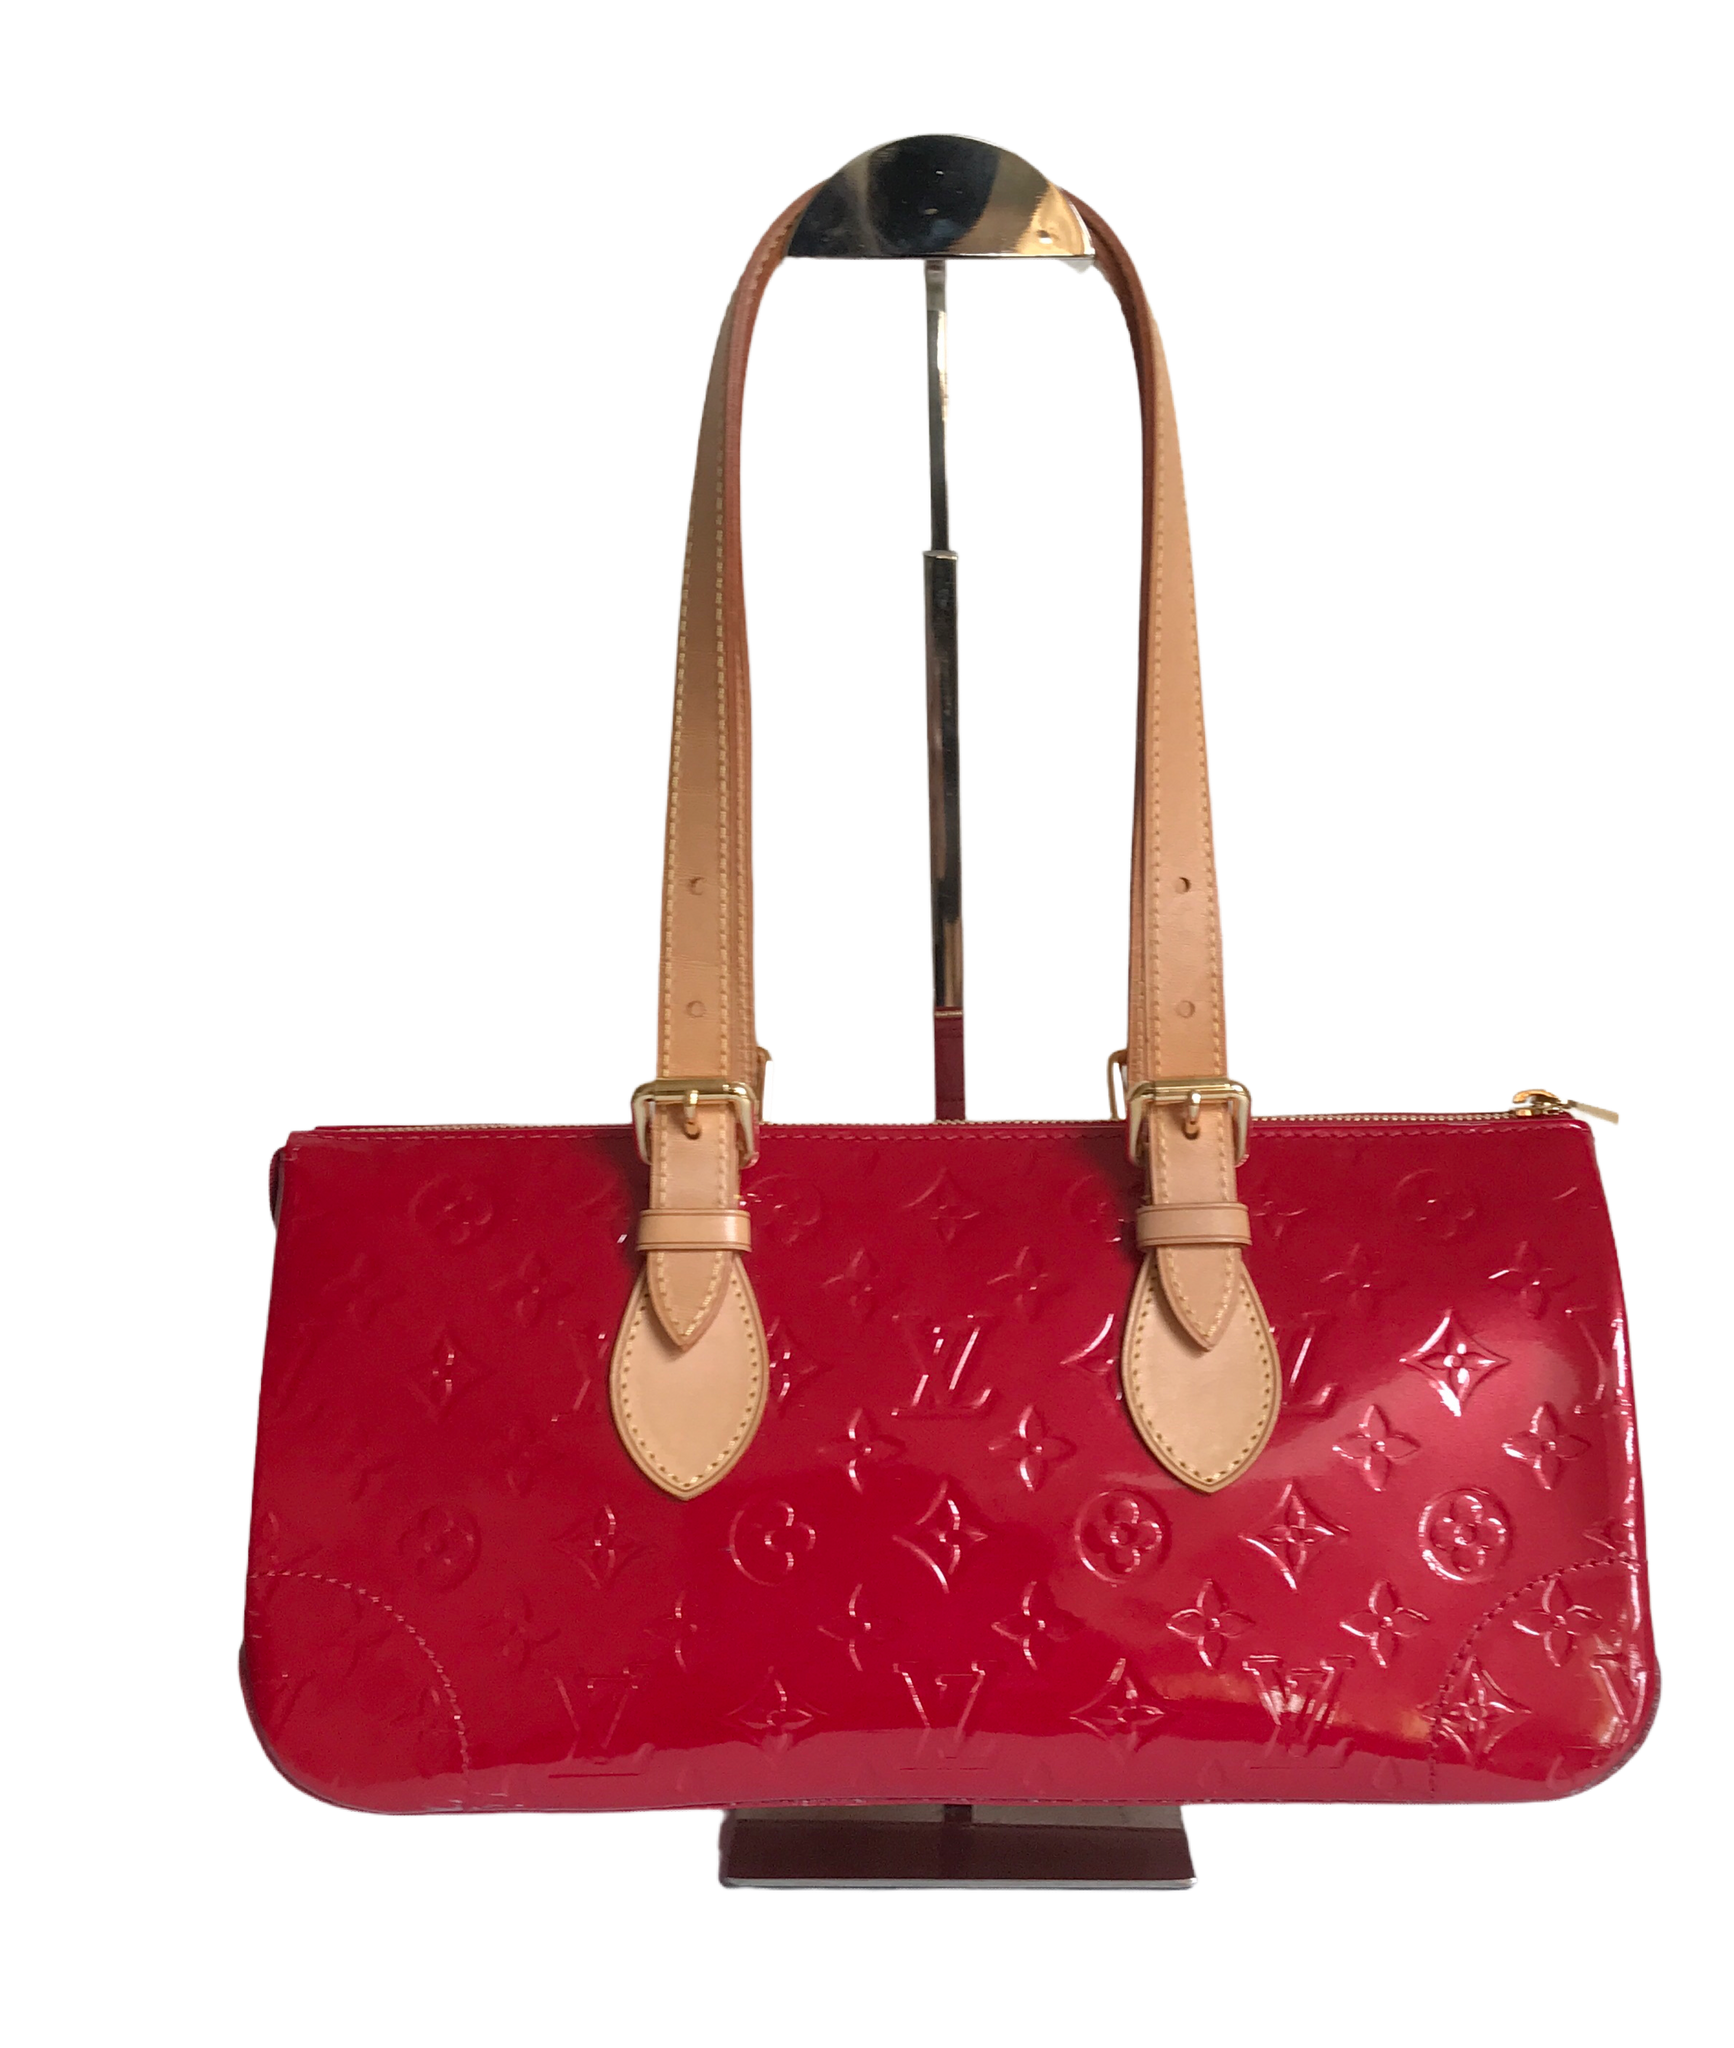 AUTHENTIC Louis Vuitton Rosewood Red Vernis Preowned (WBA1005